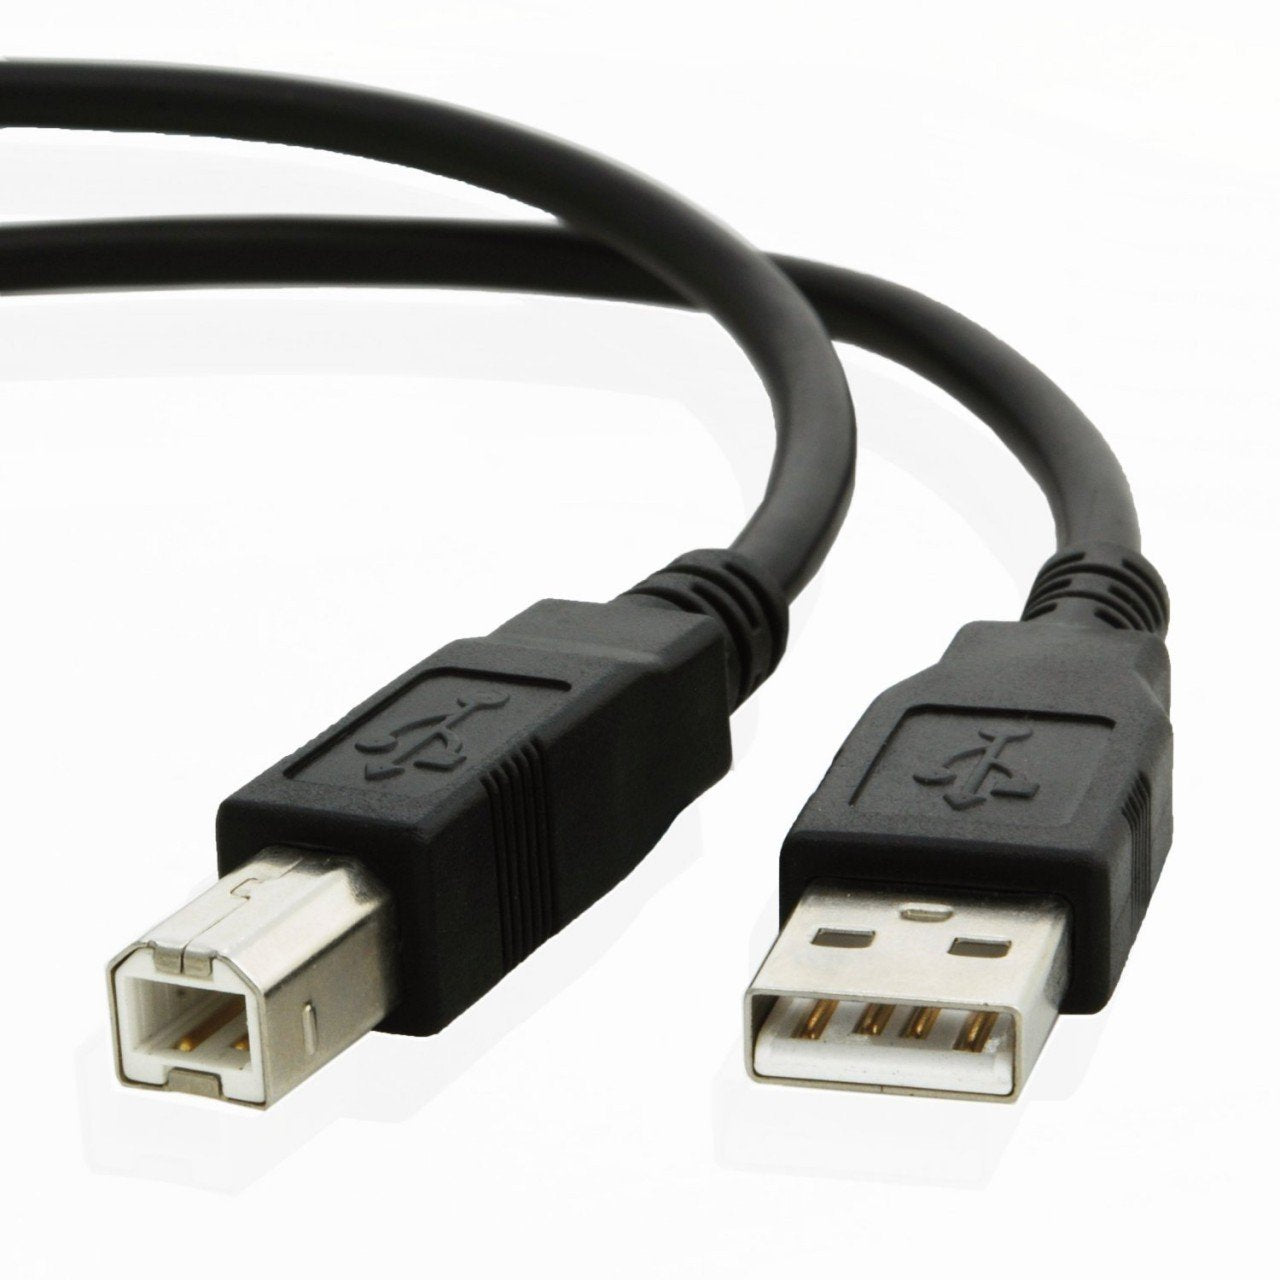 USB cable for Epson EXPRESSION XP-330